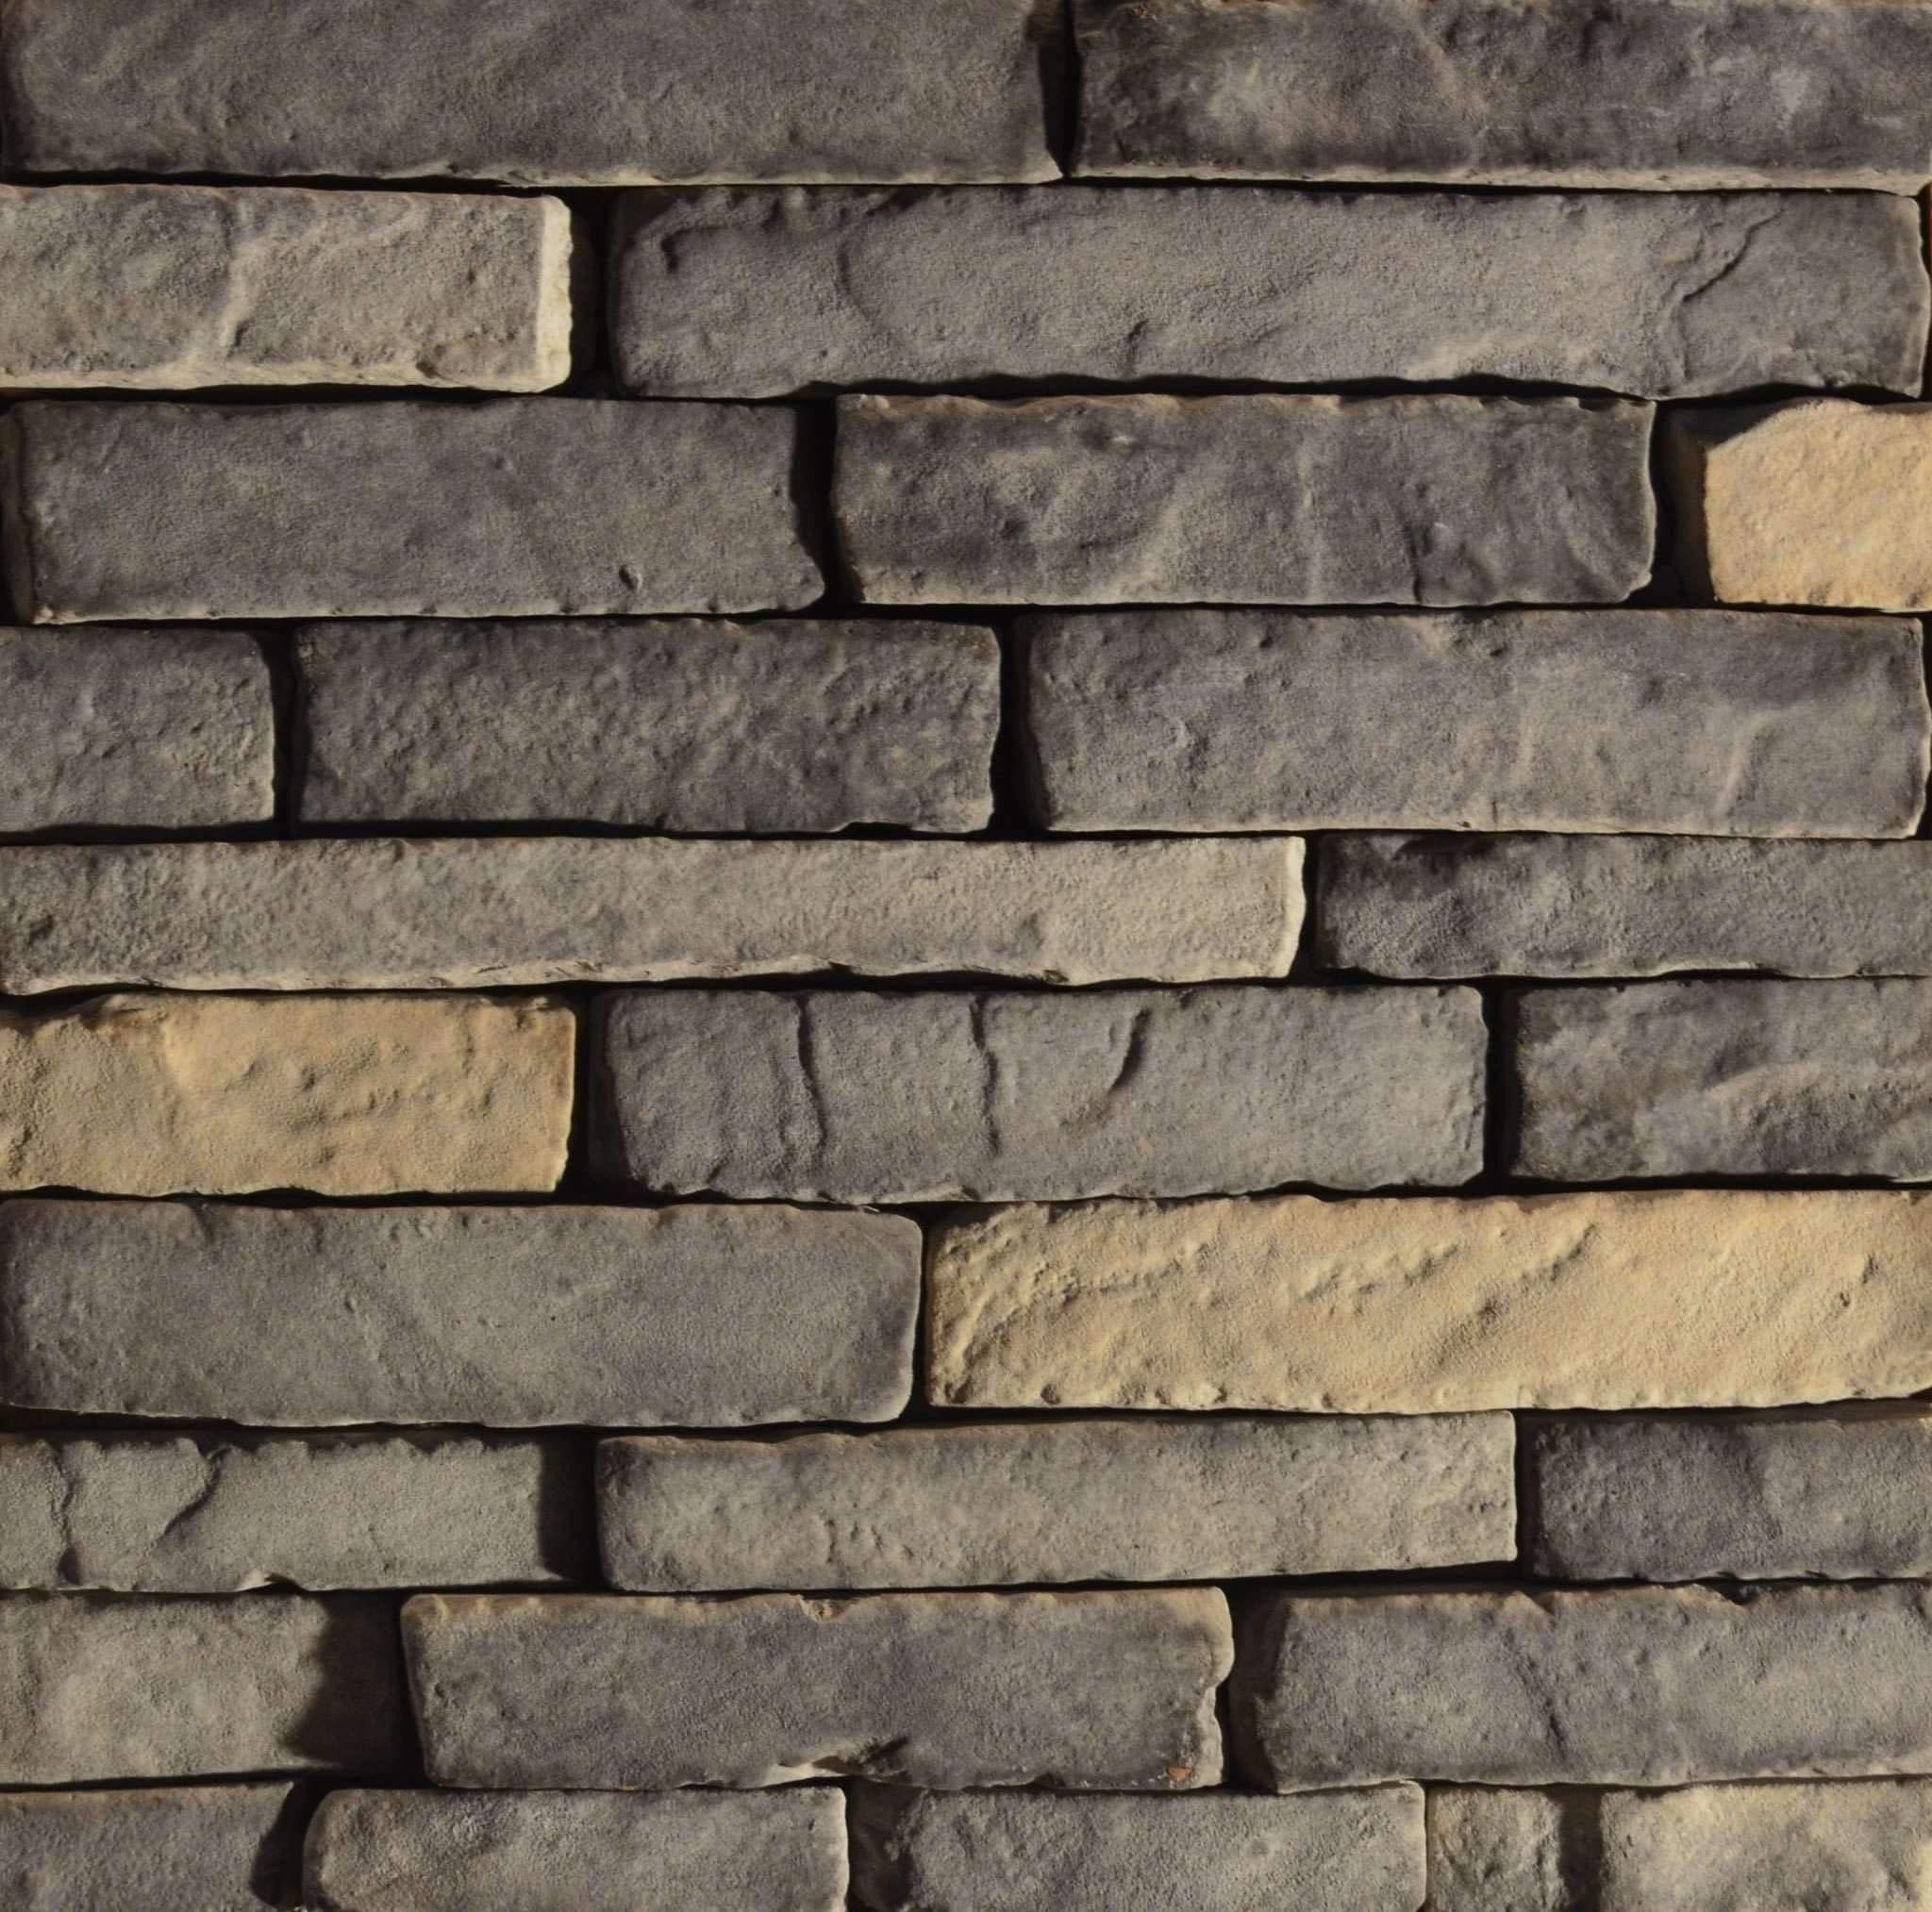 Black Forest - Dry Stack Ledgestone cheap stone veneer clearance - Discount Stones wholesale stone veneer, cheap brick veneer, cultured stone for sale